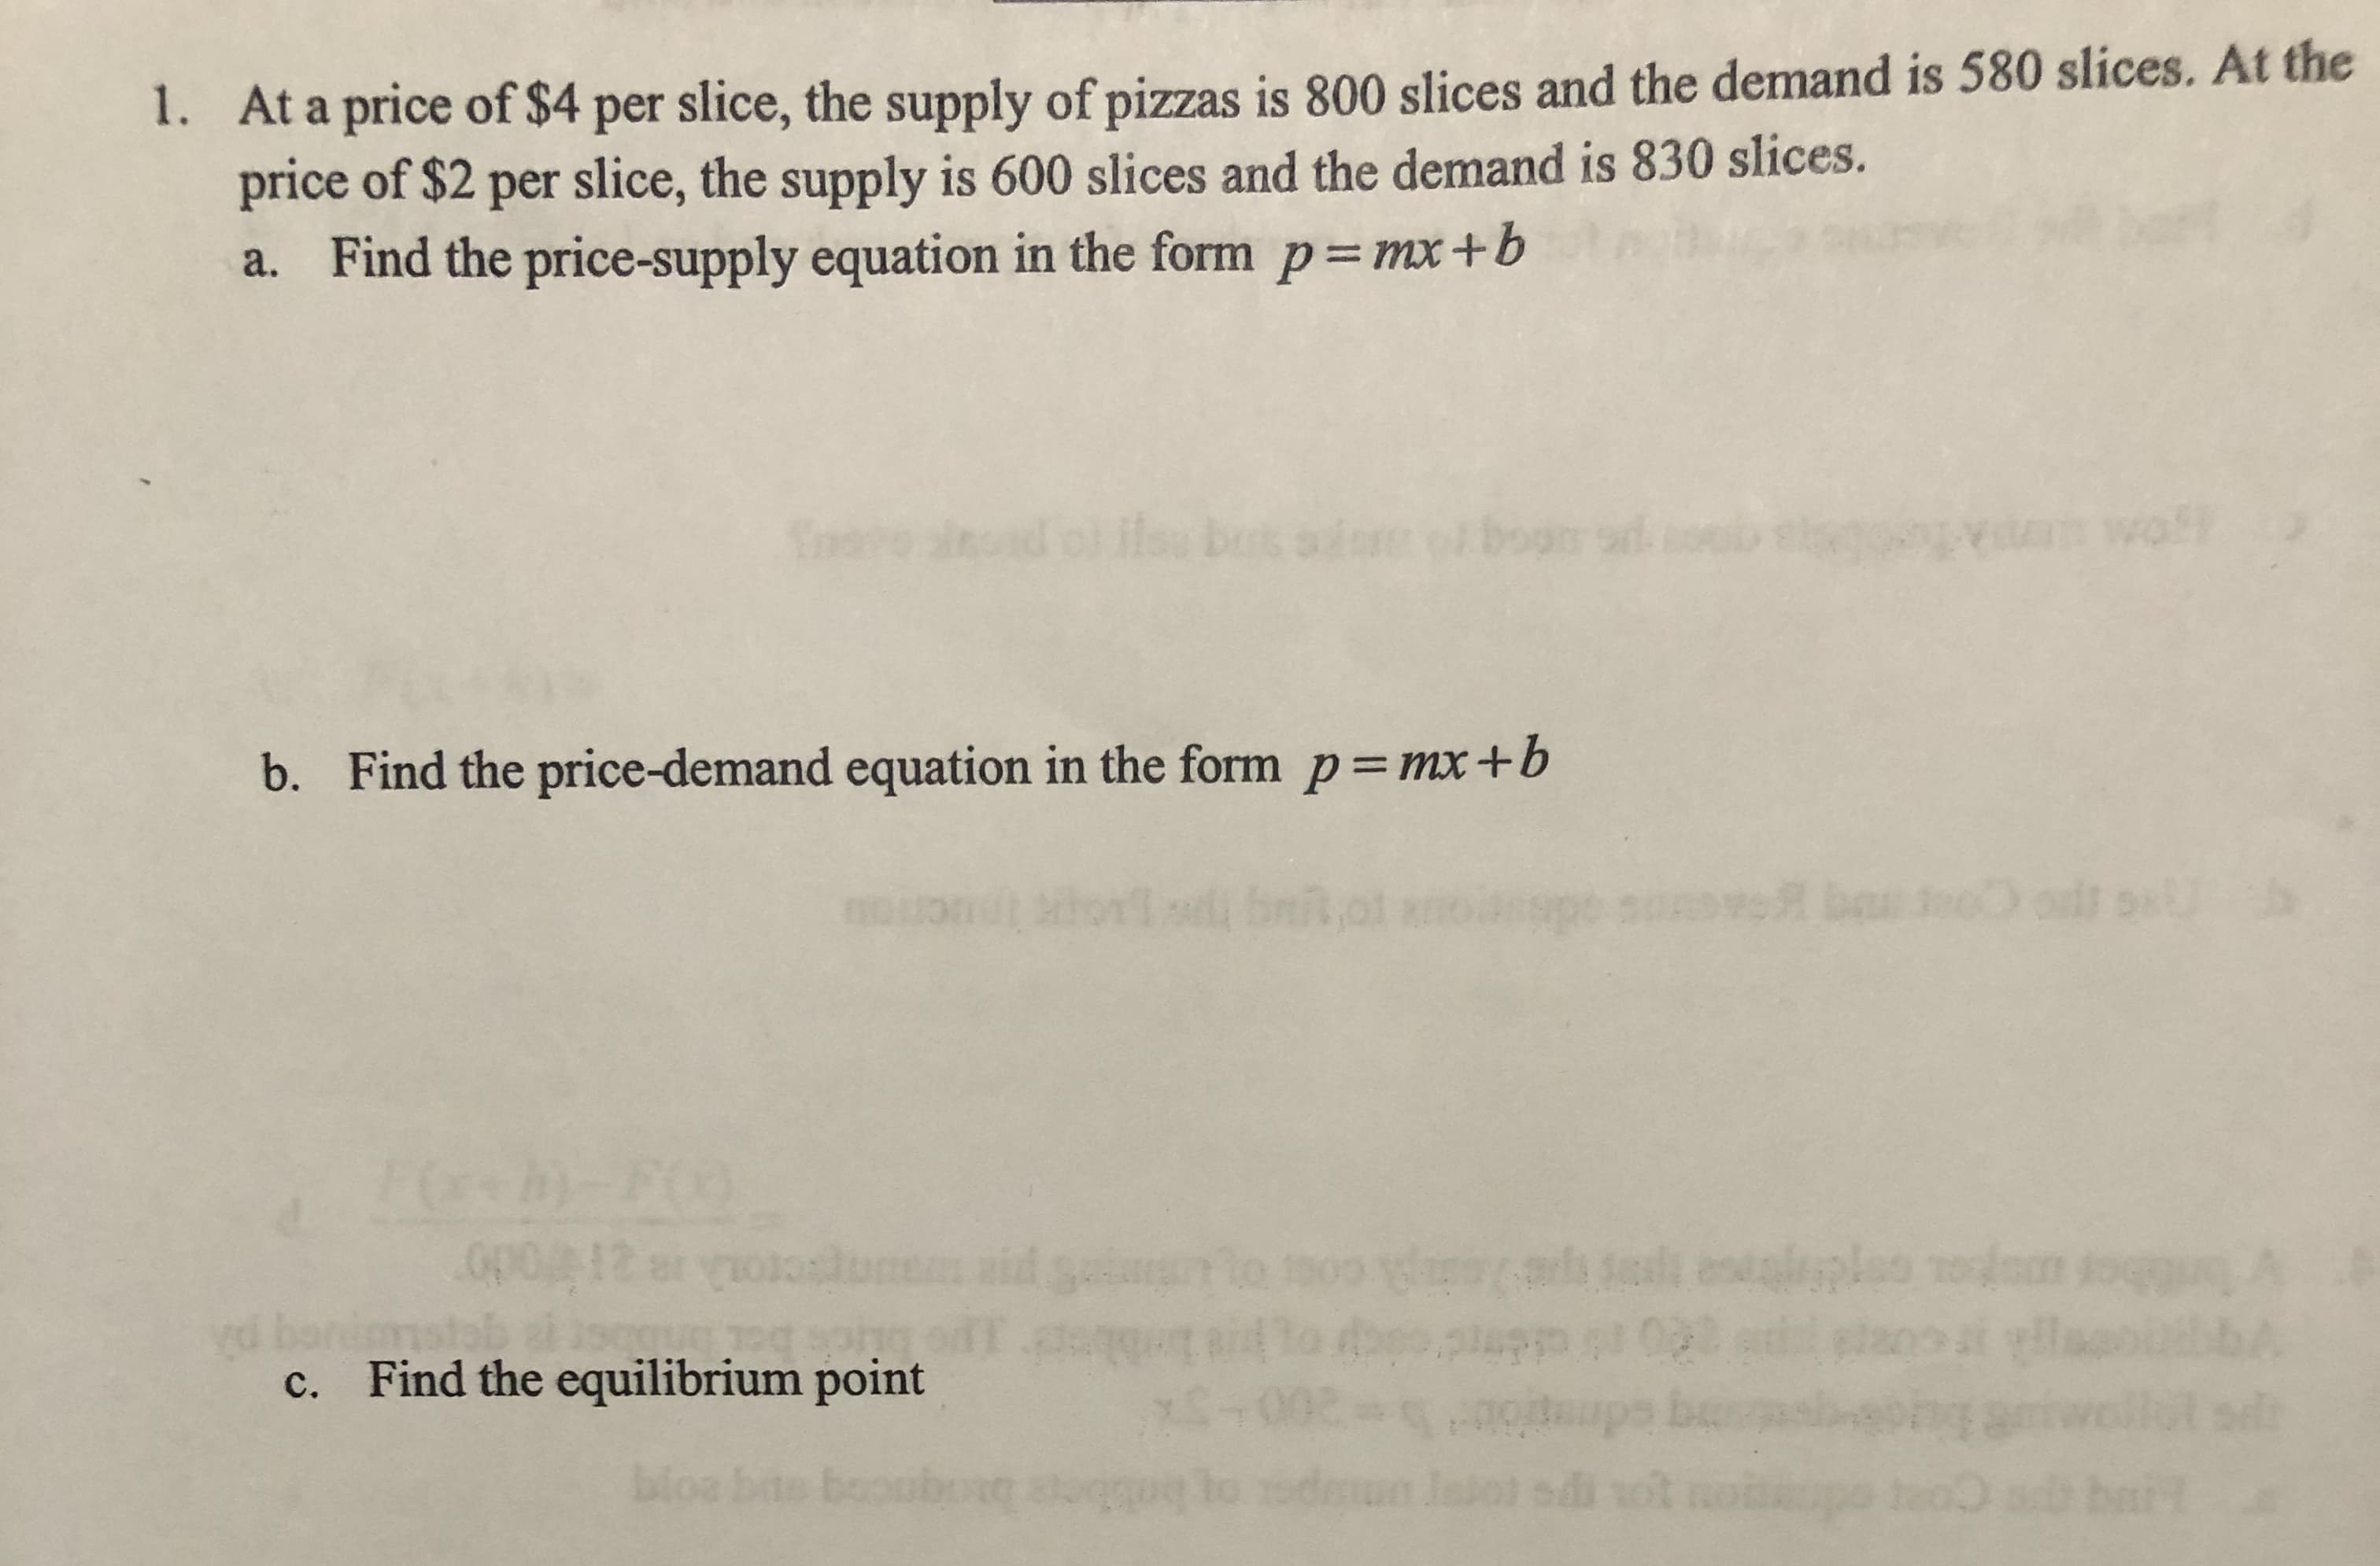 1. At a price of $4 per slice, the supply of pizzas is 800 slices and the demand is 580 slices. At the
price of $2 per slice, the supply is 600 slices and the demand is 830 slices.
a. Find the price-supply equation in the form p= mx+b
ilou sdre
ta wofl
buts
b. Find the price-demand equation in the form p= mx+b
h)-FO
opo12 er
ibior uoa onpdie t e coer o Sp
yd bon
c. Find the equilibrium point
bloe bas bor
